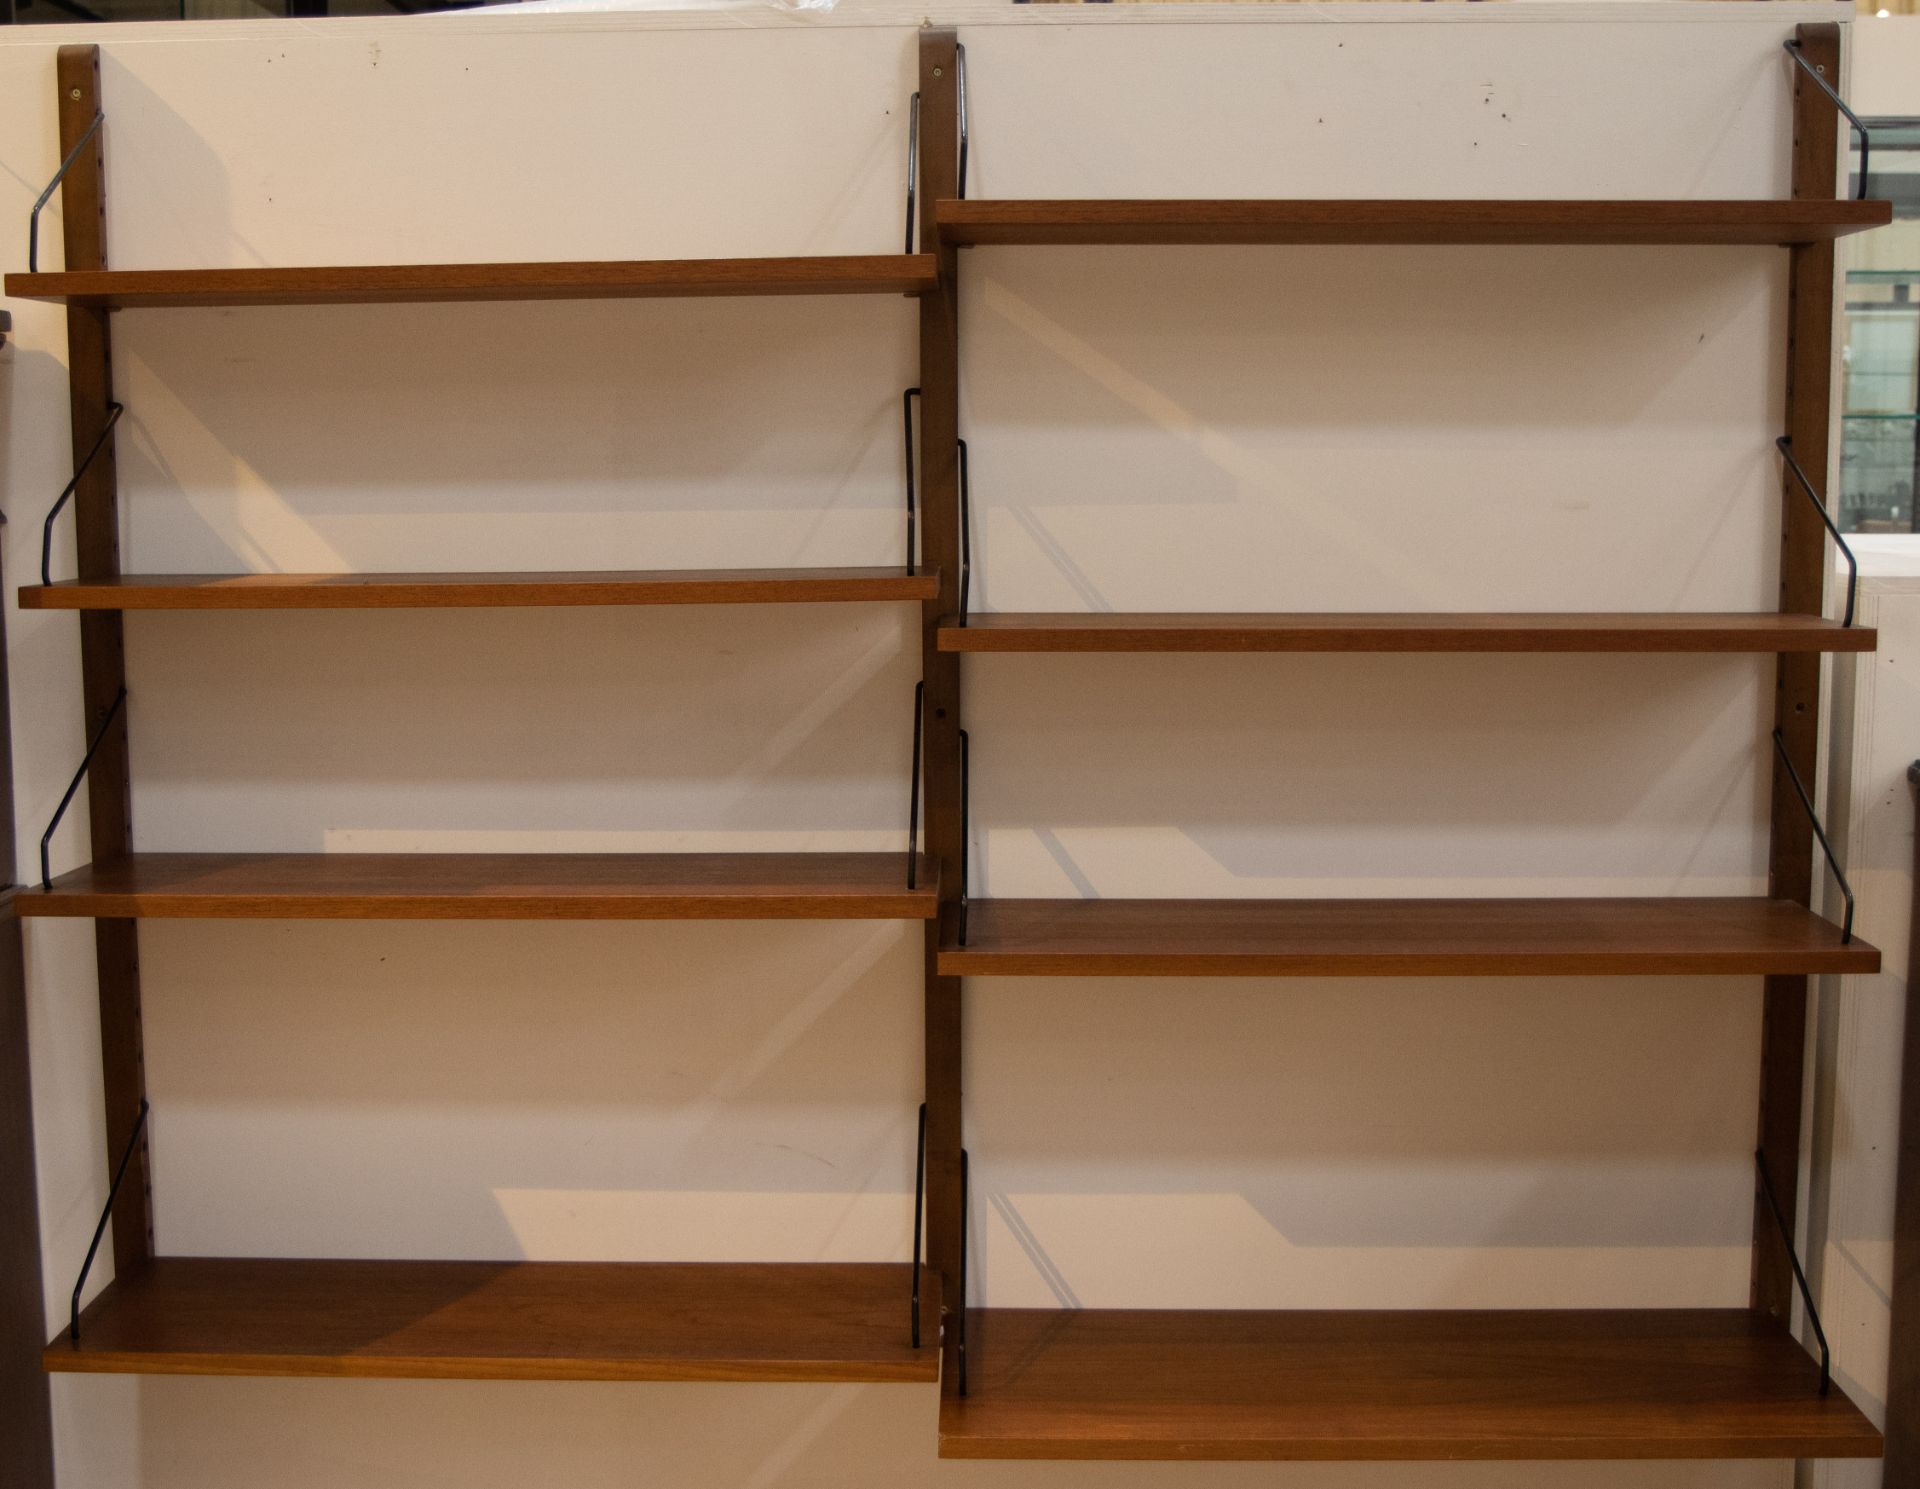 Vintage wall system - book rack in Cadovius style, 1960s, Scandinavian design